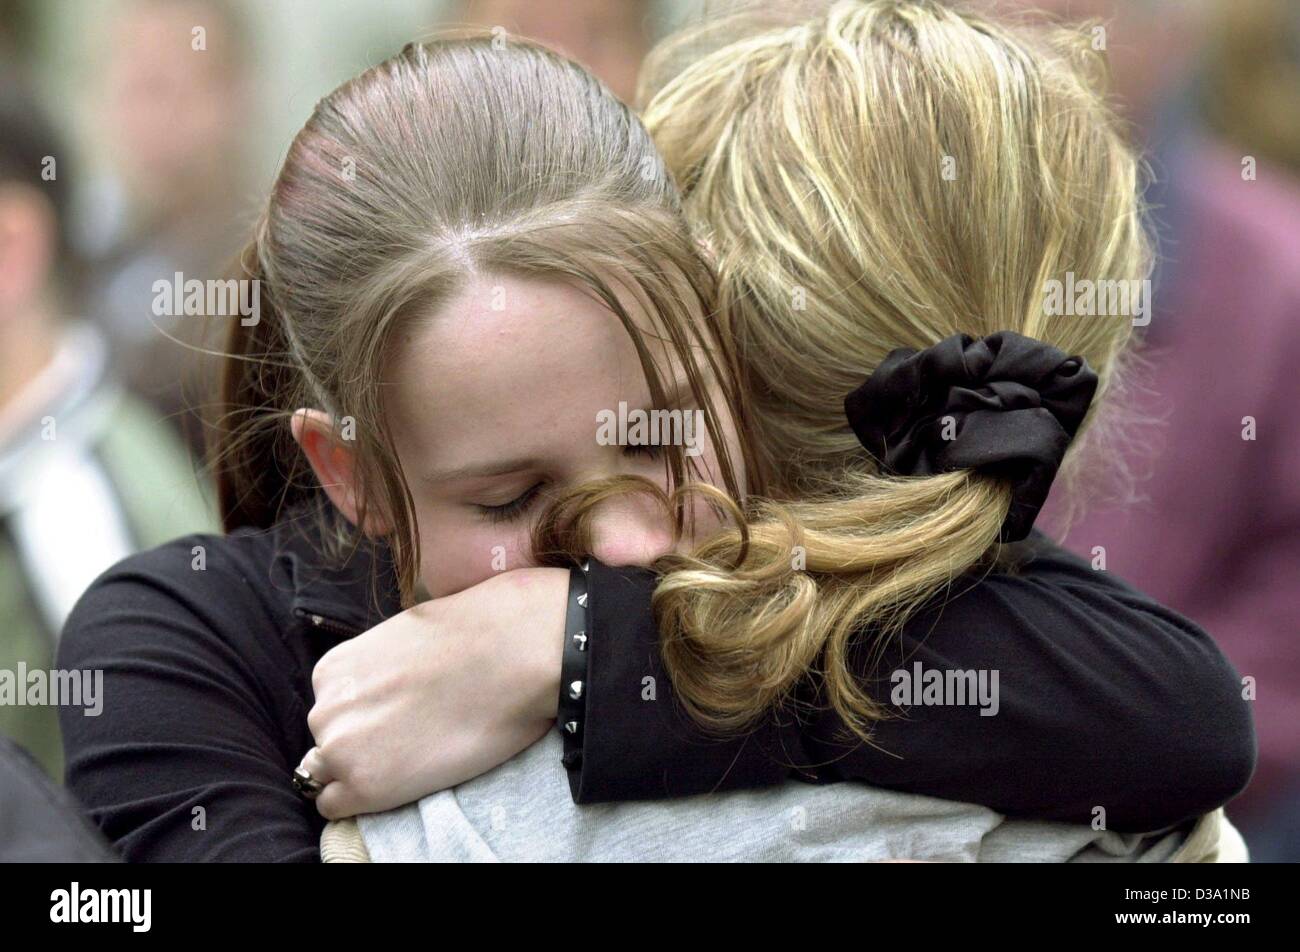 (dpa) - These two girls are safe - they survived the amok tragedy in a school in Erfurt, 26 April 2002. A 19-year-old former pupil of the 'Gutenberg Gymnasium' ran amok and shot himself after having killed 17 others, among them teachers and one policeman. Four people got hurt, but more than a hundre Stock Photo